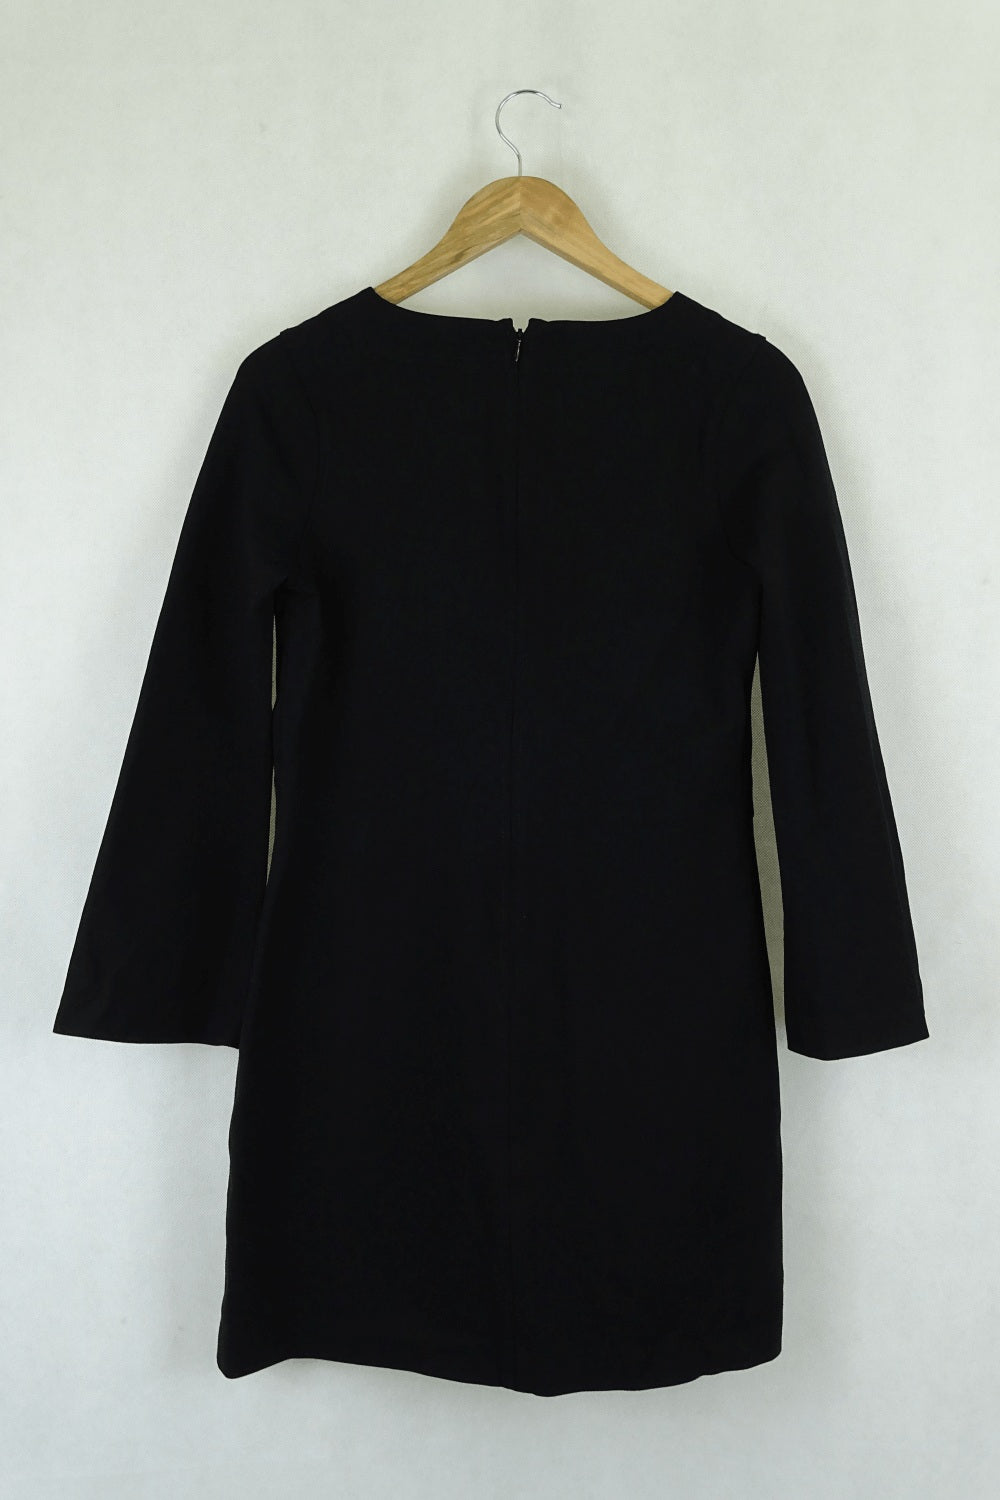 Country Road Black Dress Xs